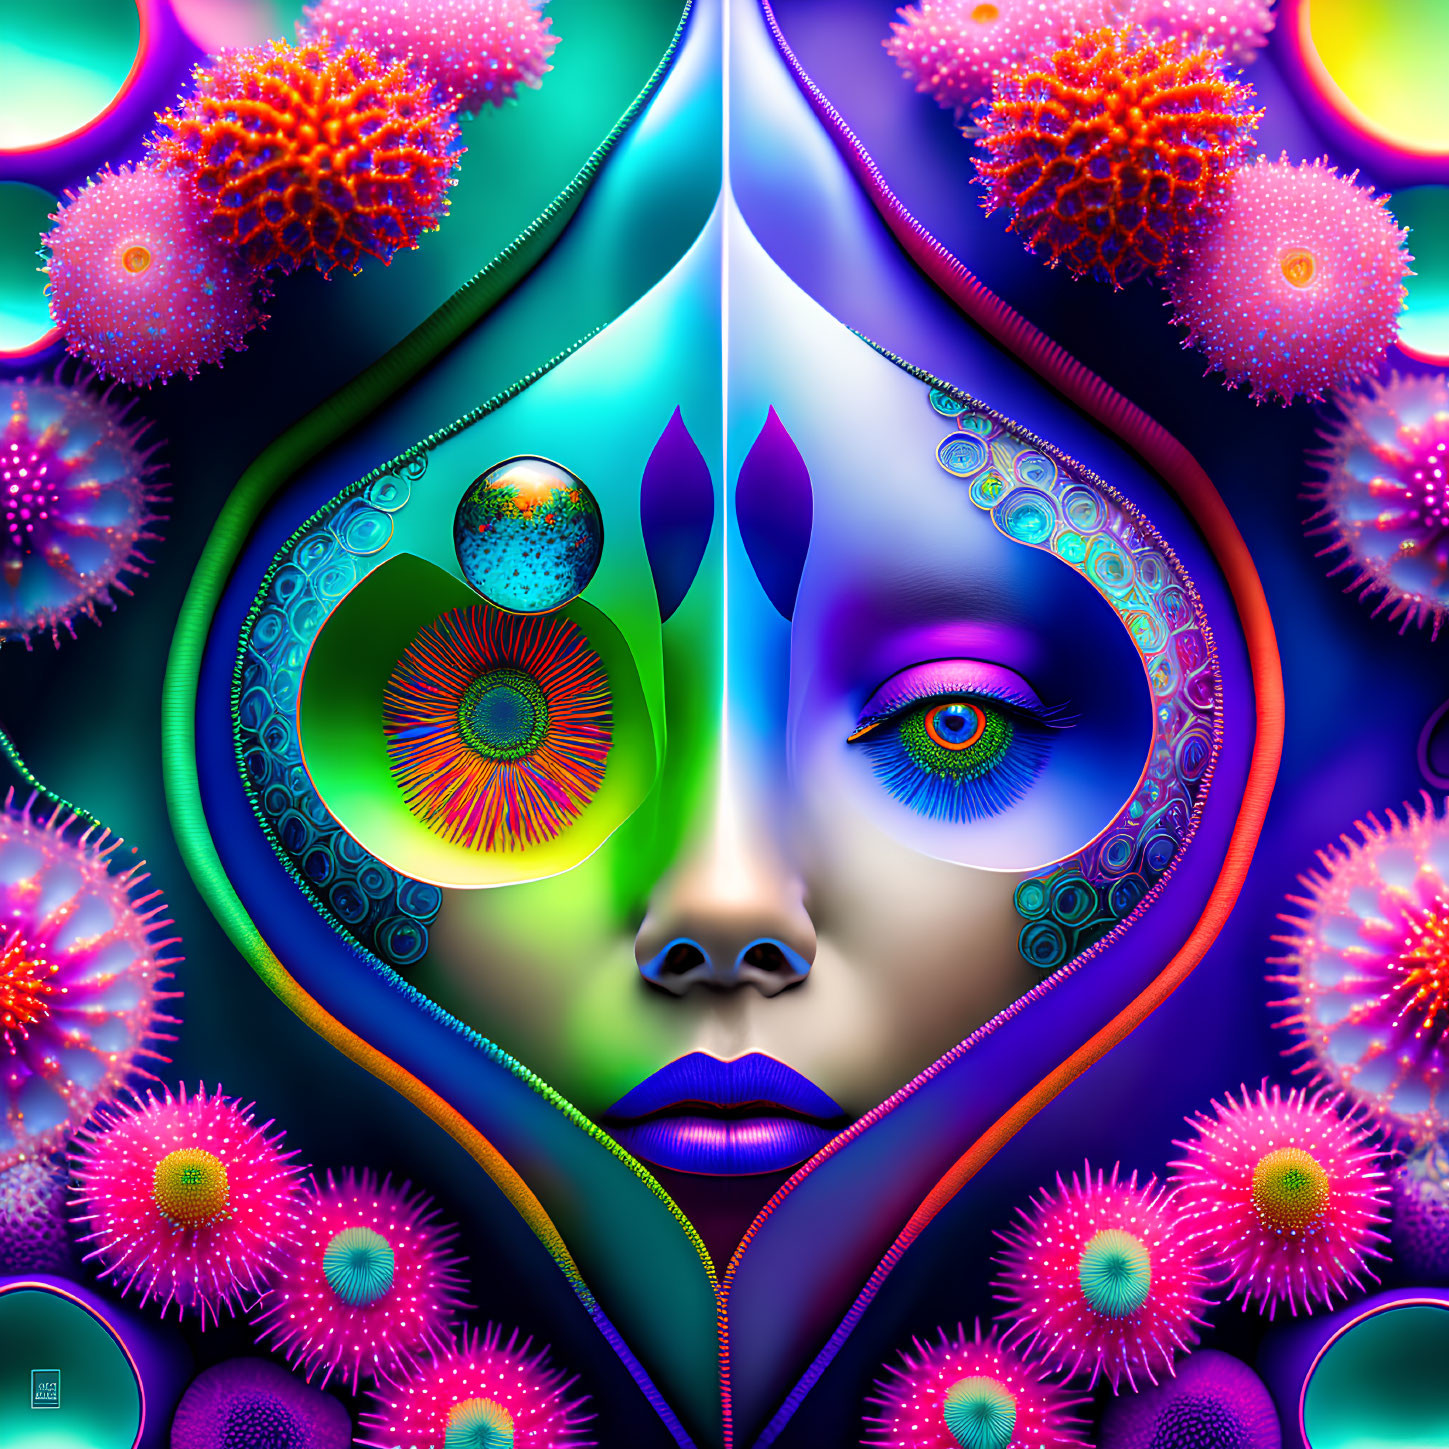 Symmetrical Face Artwork with Neon Colors and Intricate Patterns